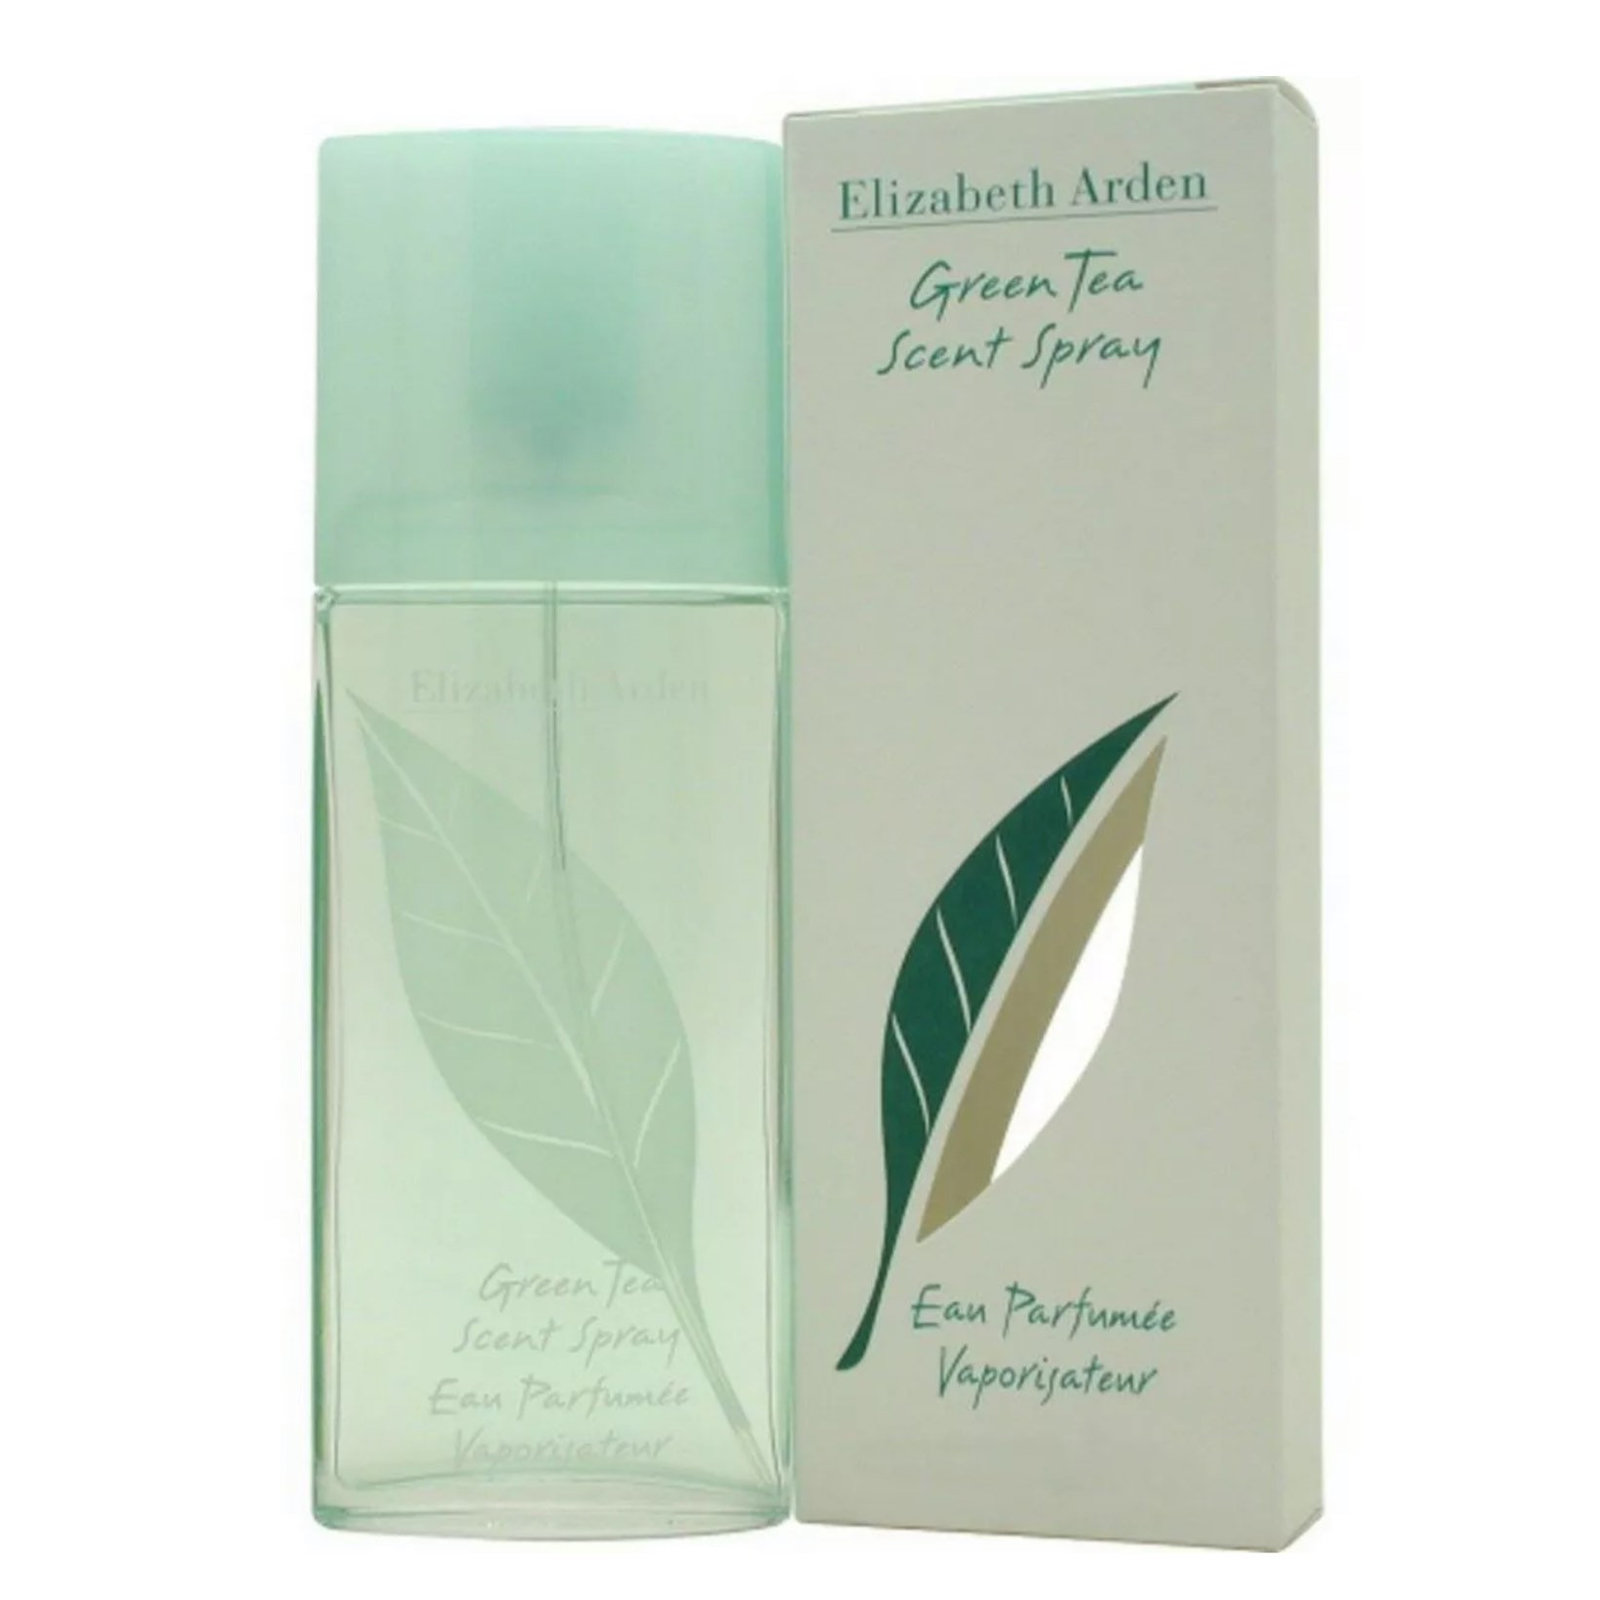 GREEN TEA by Elizabeth Arden perfume for her EDP 3.3 / 3.4 oz New in Box - $29.00